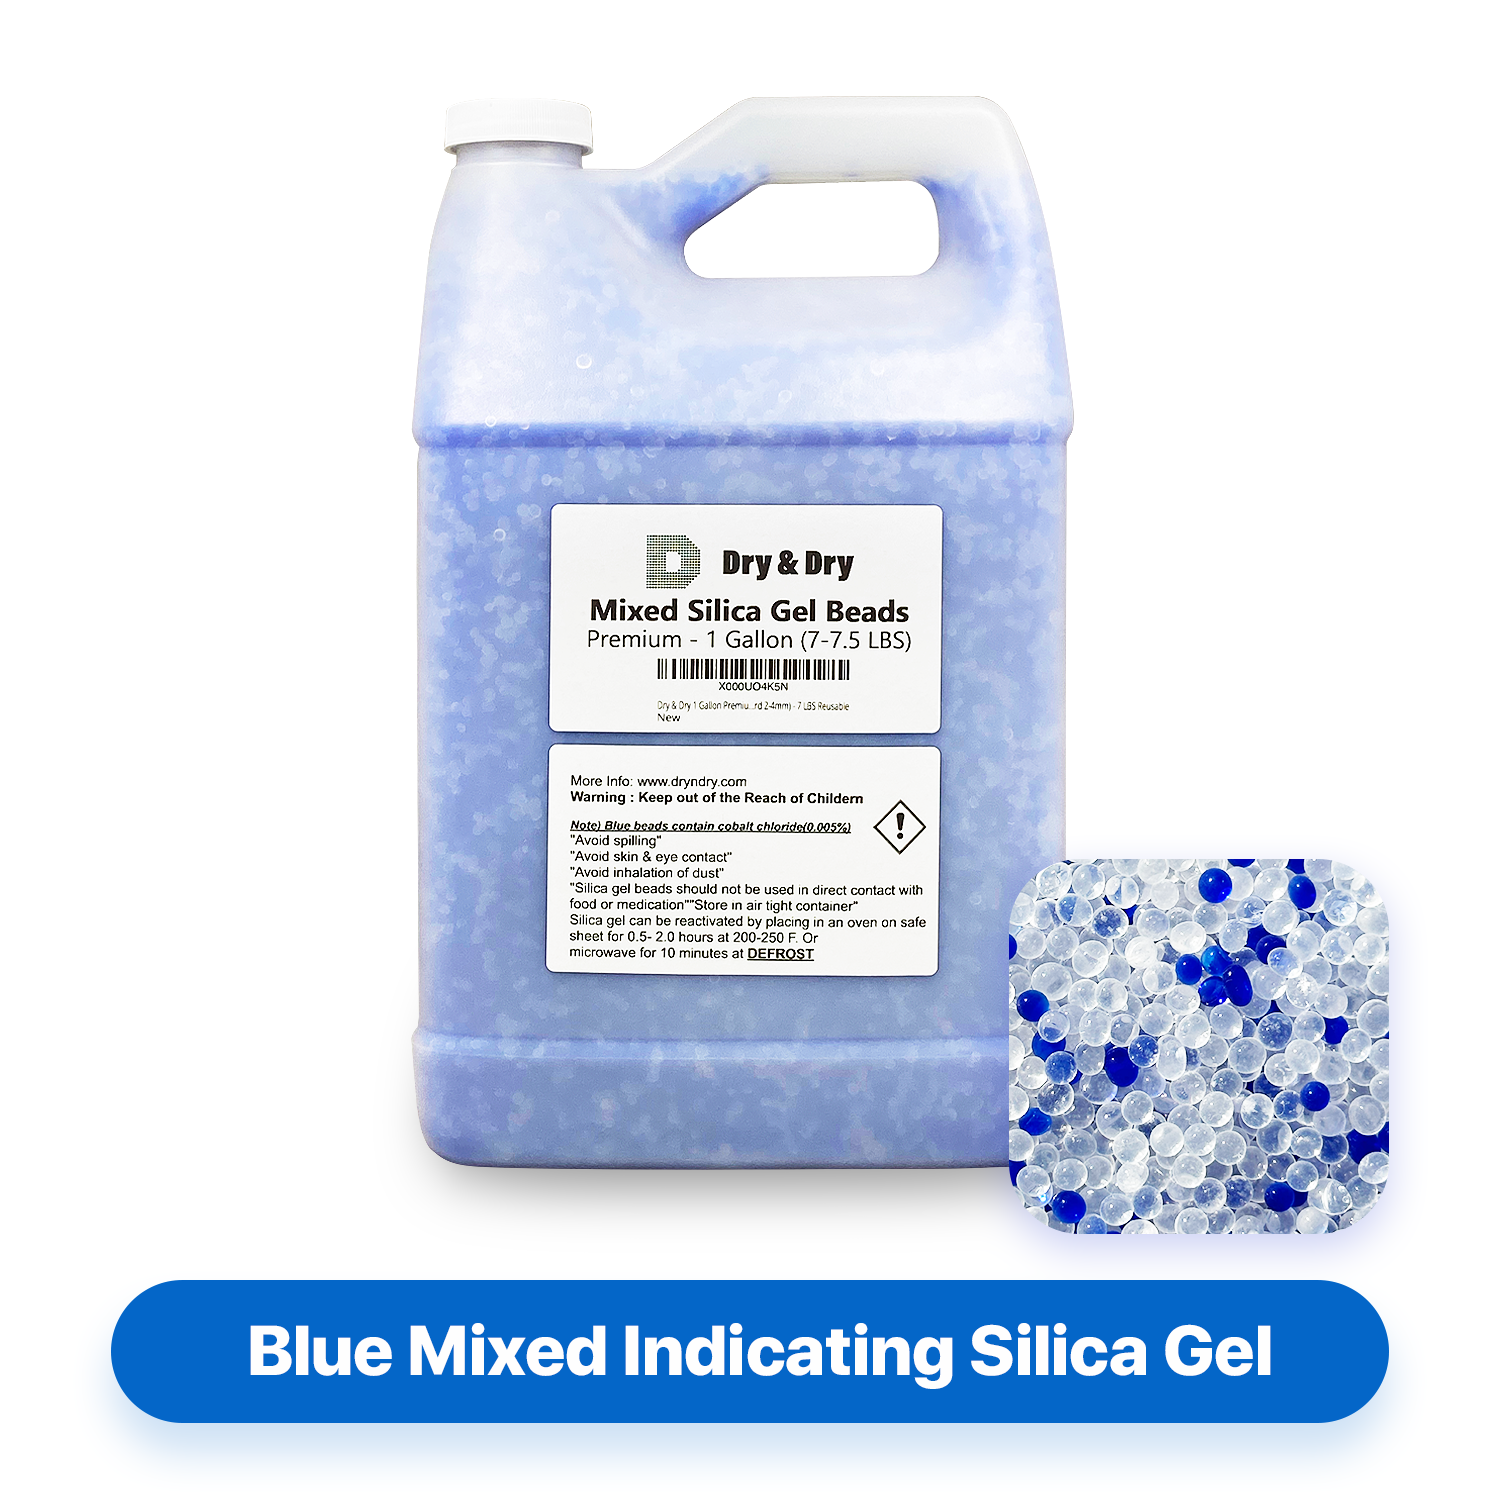 1 Gallon (7 LBS) "Dry & Dry" High Quality Mixed Blue & White Silica Gel Desiccant Beads